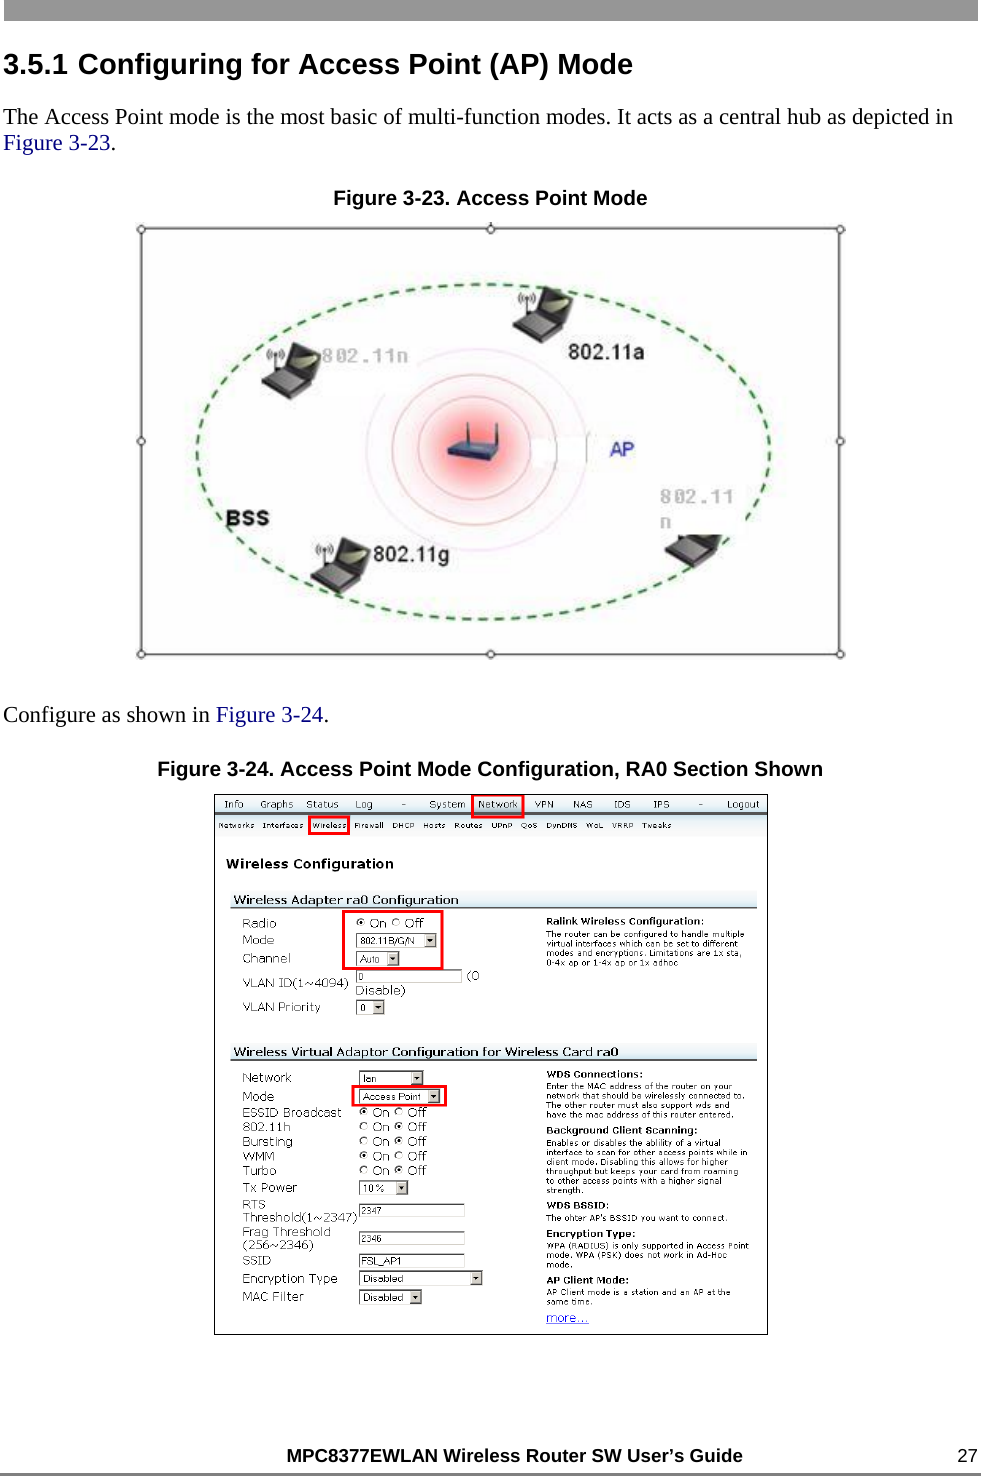                                                          MPC8377EWLAN Wireless Router SW User’s Guide    27 3.5.1 Configuring for Access Point (AP) Mode The Access Point mode is the most basic of multi-function modes. It acts as a central hub as depicted in Figure 3-23. Figure 3-23. Access Point Mode  Configure as shown in Figure 3-24. Figure 3-24. Access Point Mode Configuration, RA0 Section Shown   